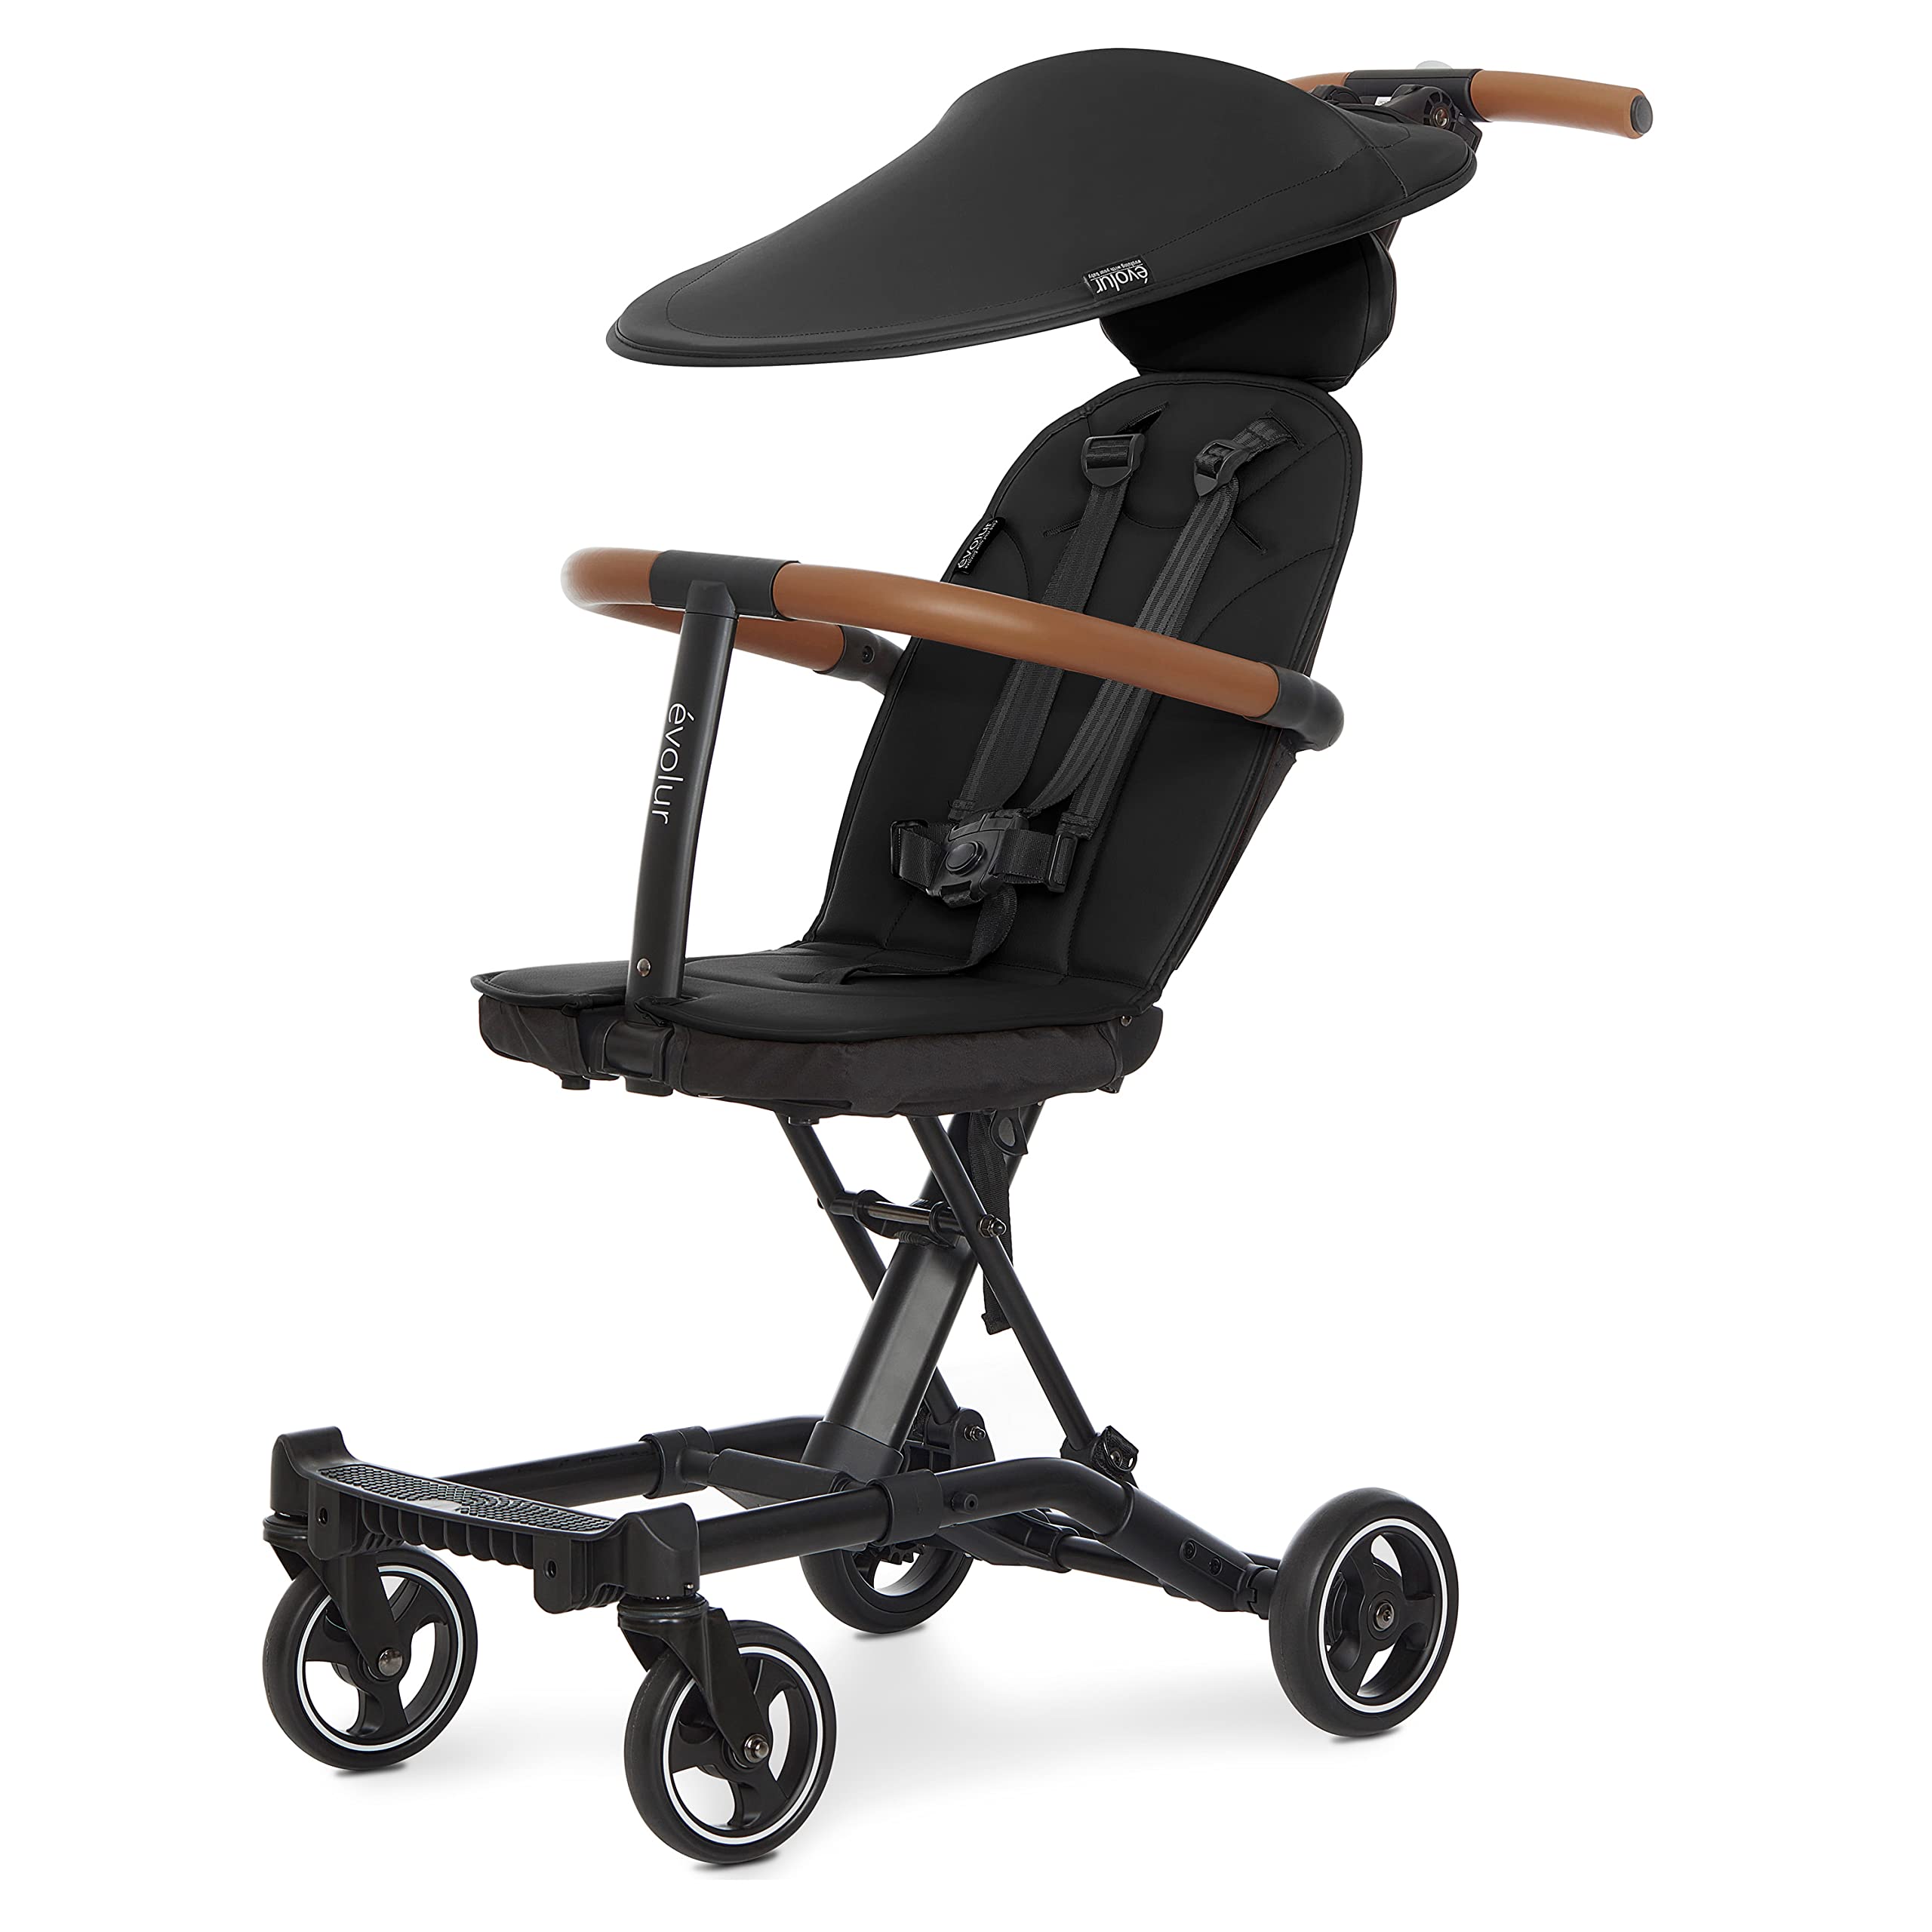 Evolur Cruise Rider Stroller With Canopy, Lightweight Umbrella Stroller With Compact Fold, Easy To Carry Travel Stroller - Noir